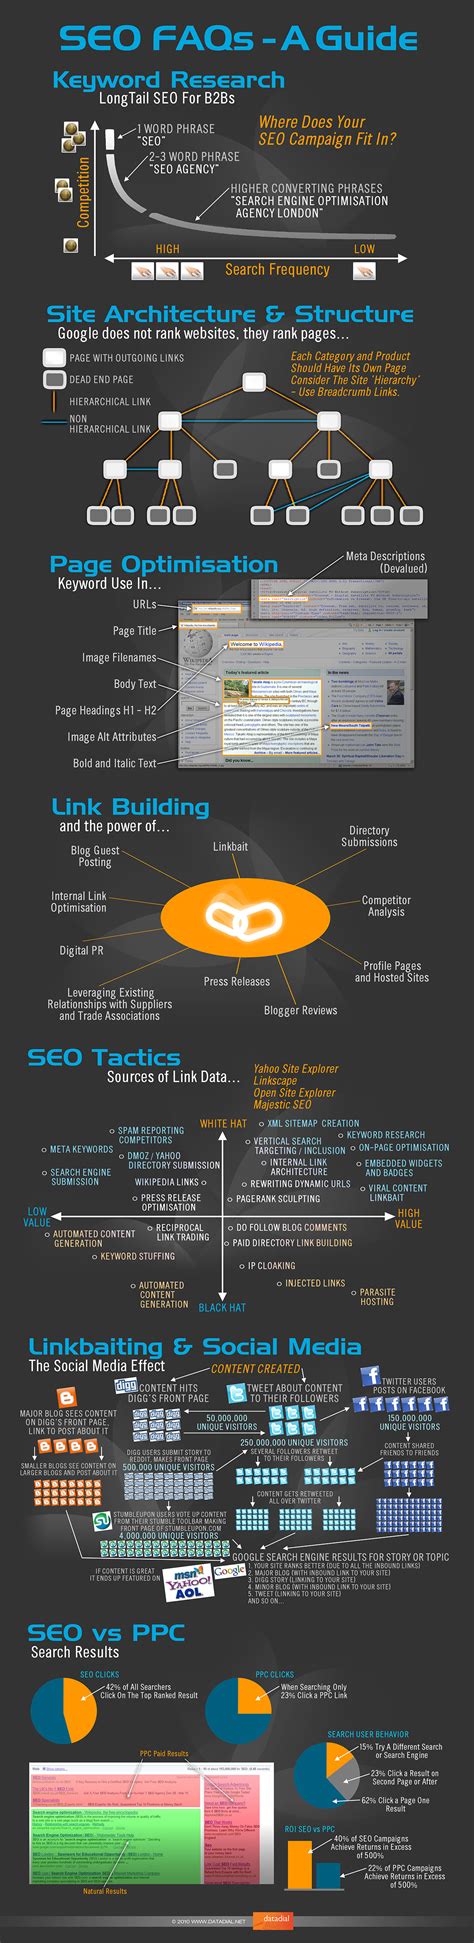 SEO In Pictures - Our SEO Infographic - Datadial